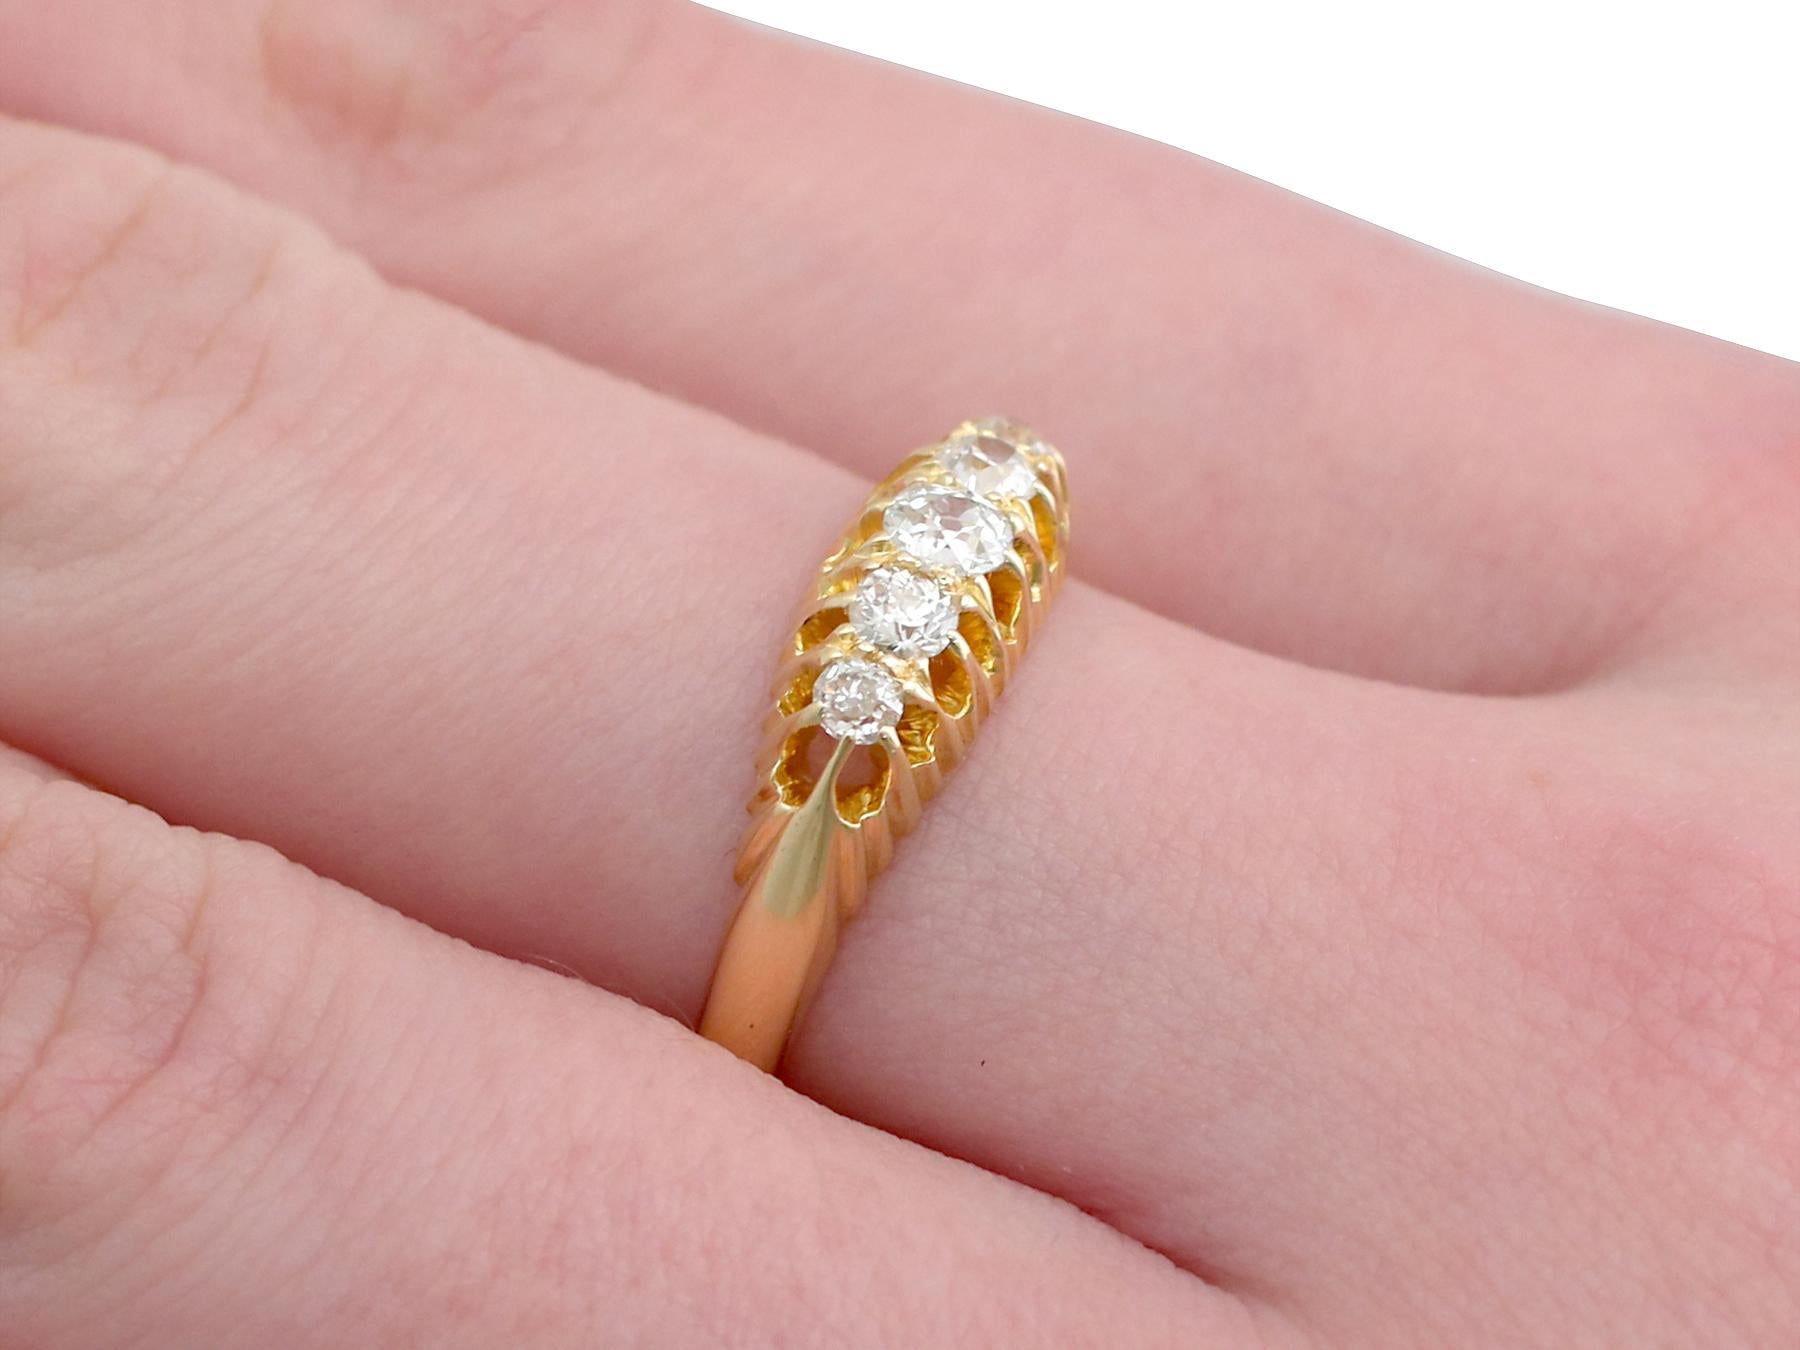 Antique 1905 Diamond and Yellow Gold Five-Stone Cocktail Ring In Excellent Condition For Sale In Jesmond, Newcastle Upon Tyne